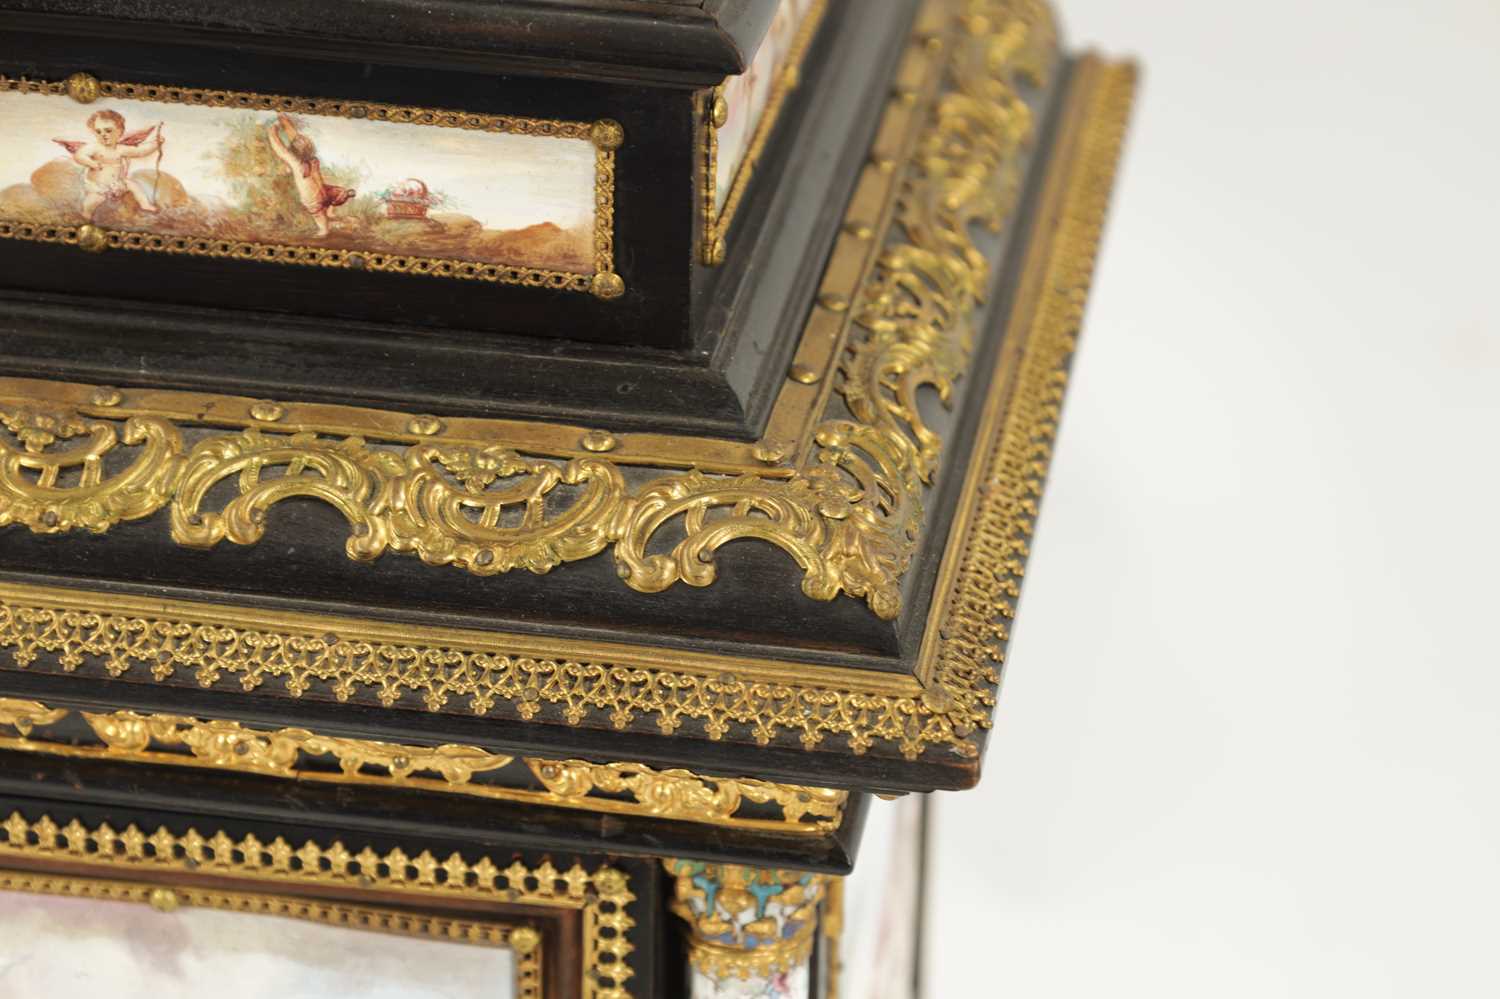 A FINE AND RARE EARLY/MID 19TH CENTURY AUSTRIAN EBONISED, PRESSED BRASS MOUNTED AND VIENNESE ENAMELL - Image 4 of 14